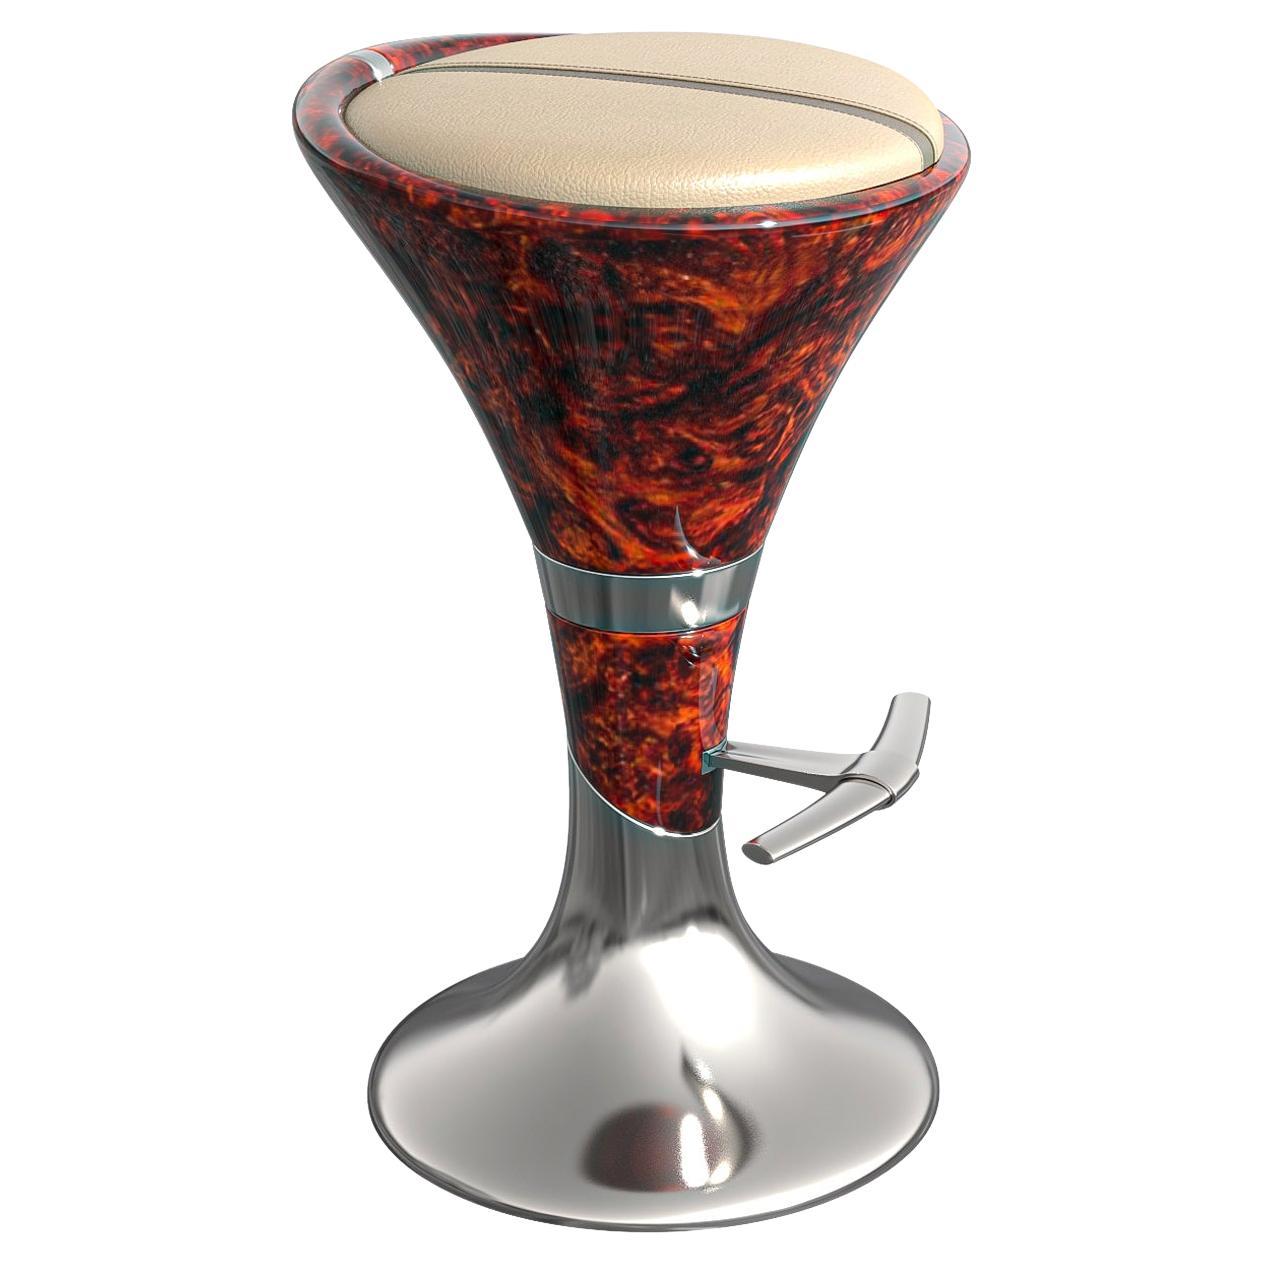 "il Destino" Bar Stool with Burl Walnut, Stainless Steel, Hand Crafted, Istanbul